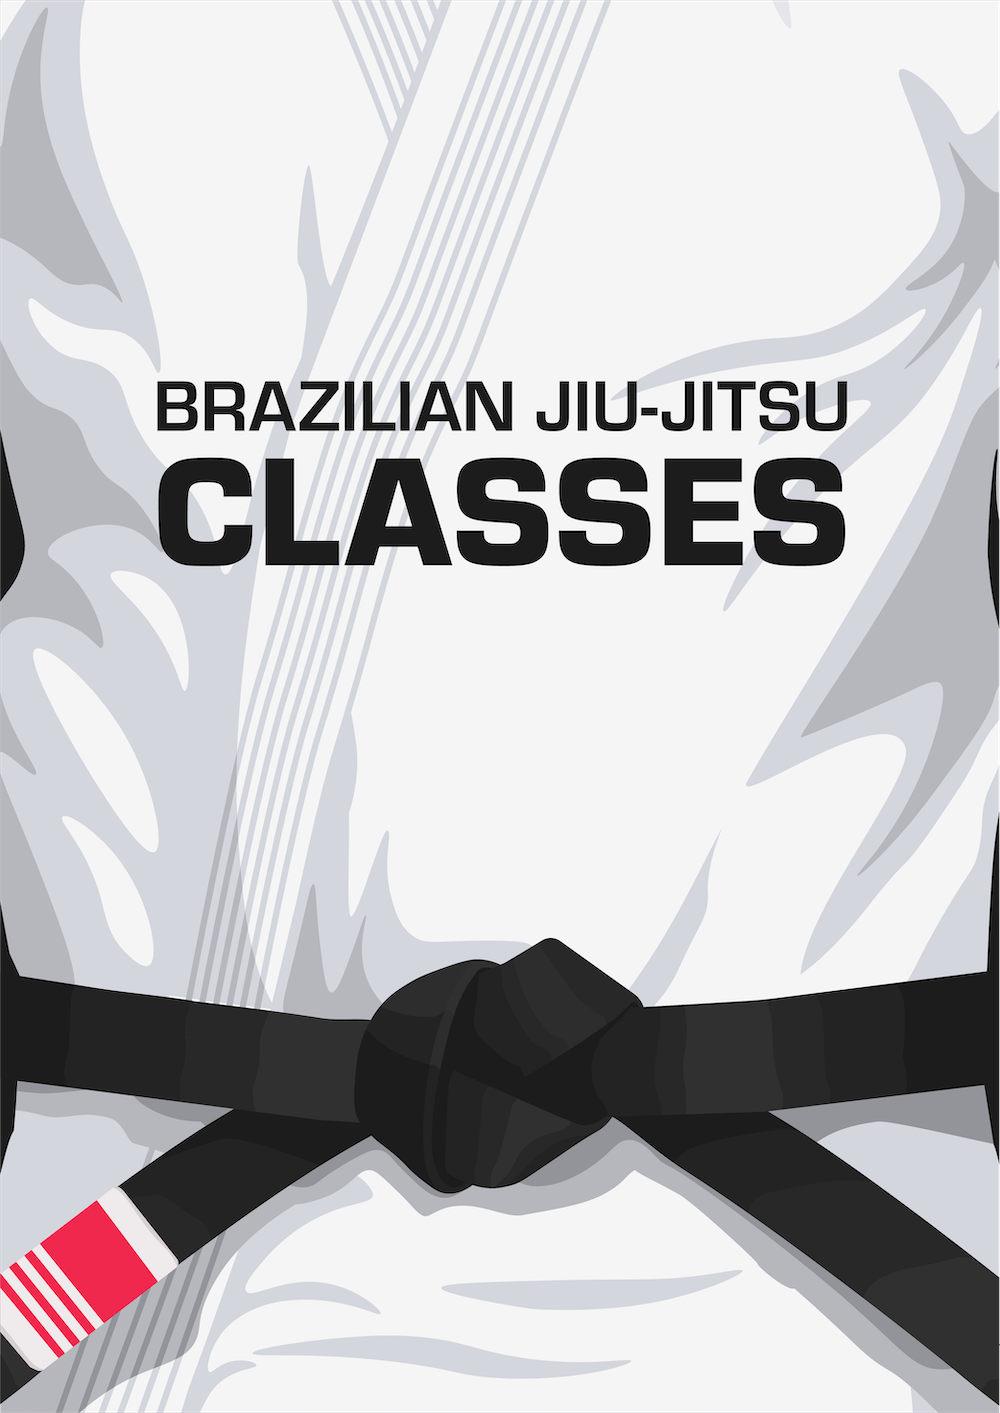 Majestic Youth Sports Center now has Brazilian Jiu Jitsu classes, a great place for kids to get active, build self-confidence, and learn important life skills. Brazilian Jiu Jitsu teaches discipline, respect, and focus, and can help kids develop a growth mindset and improve their physical fitness.